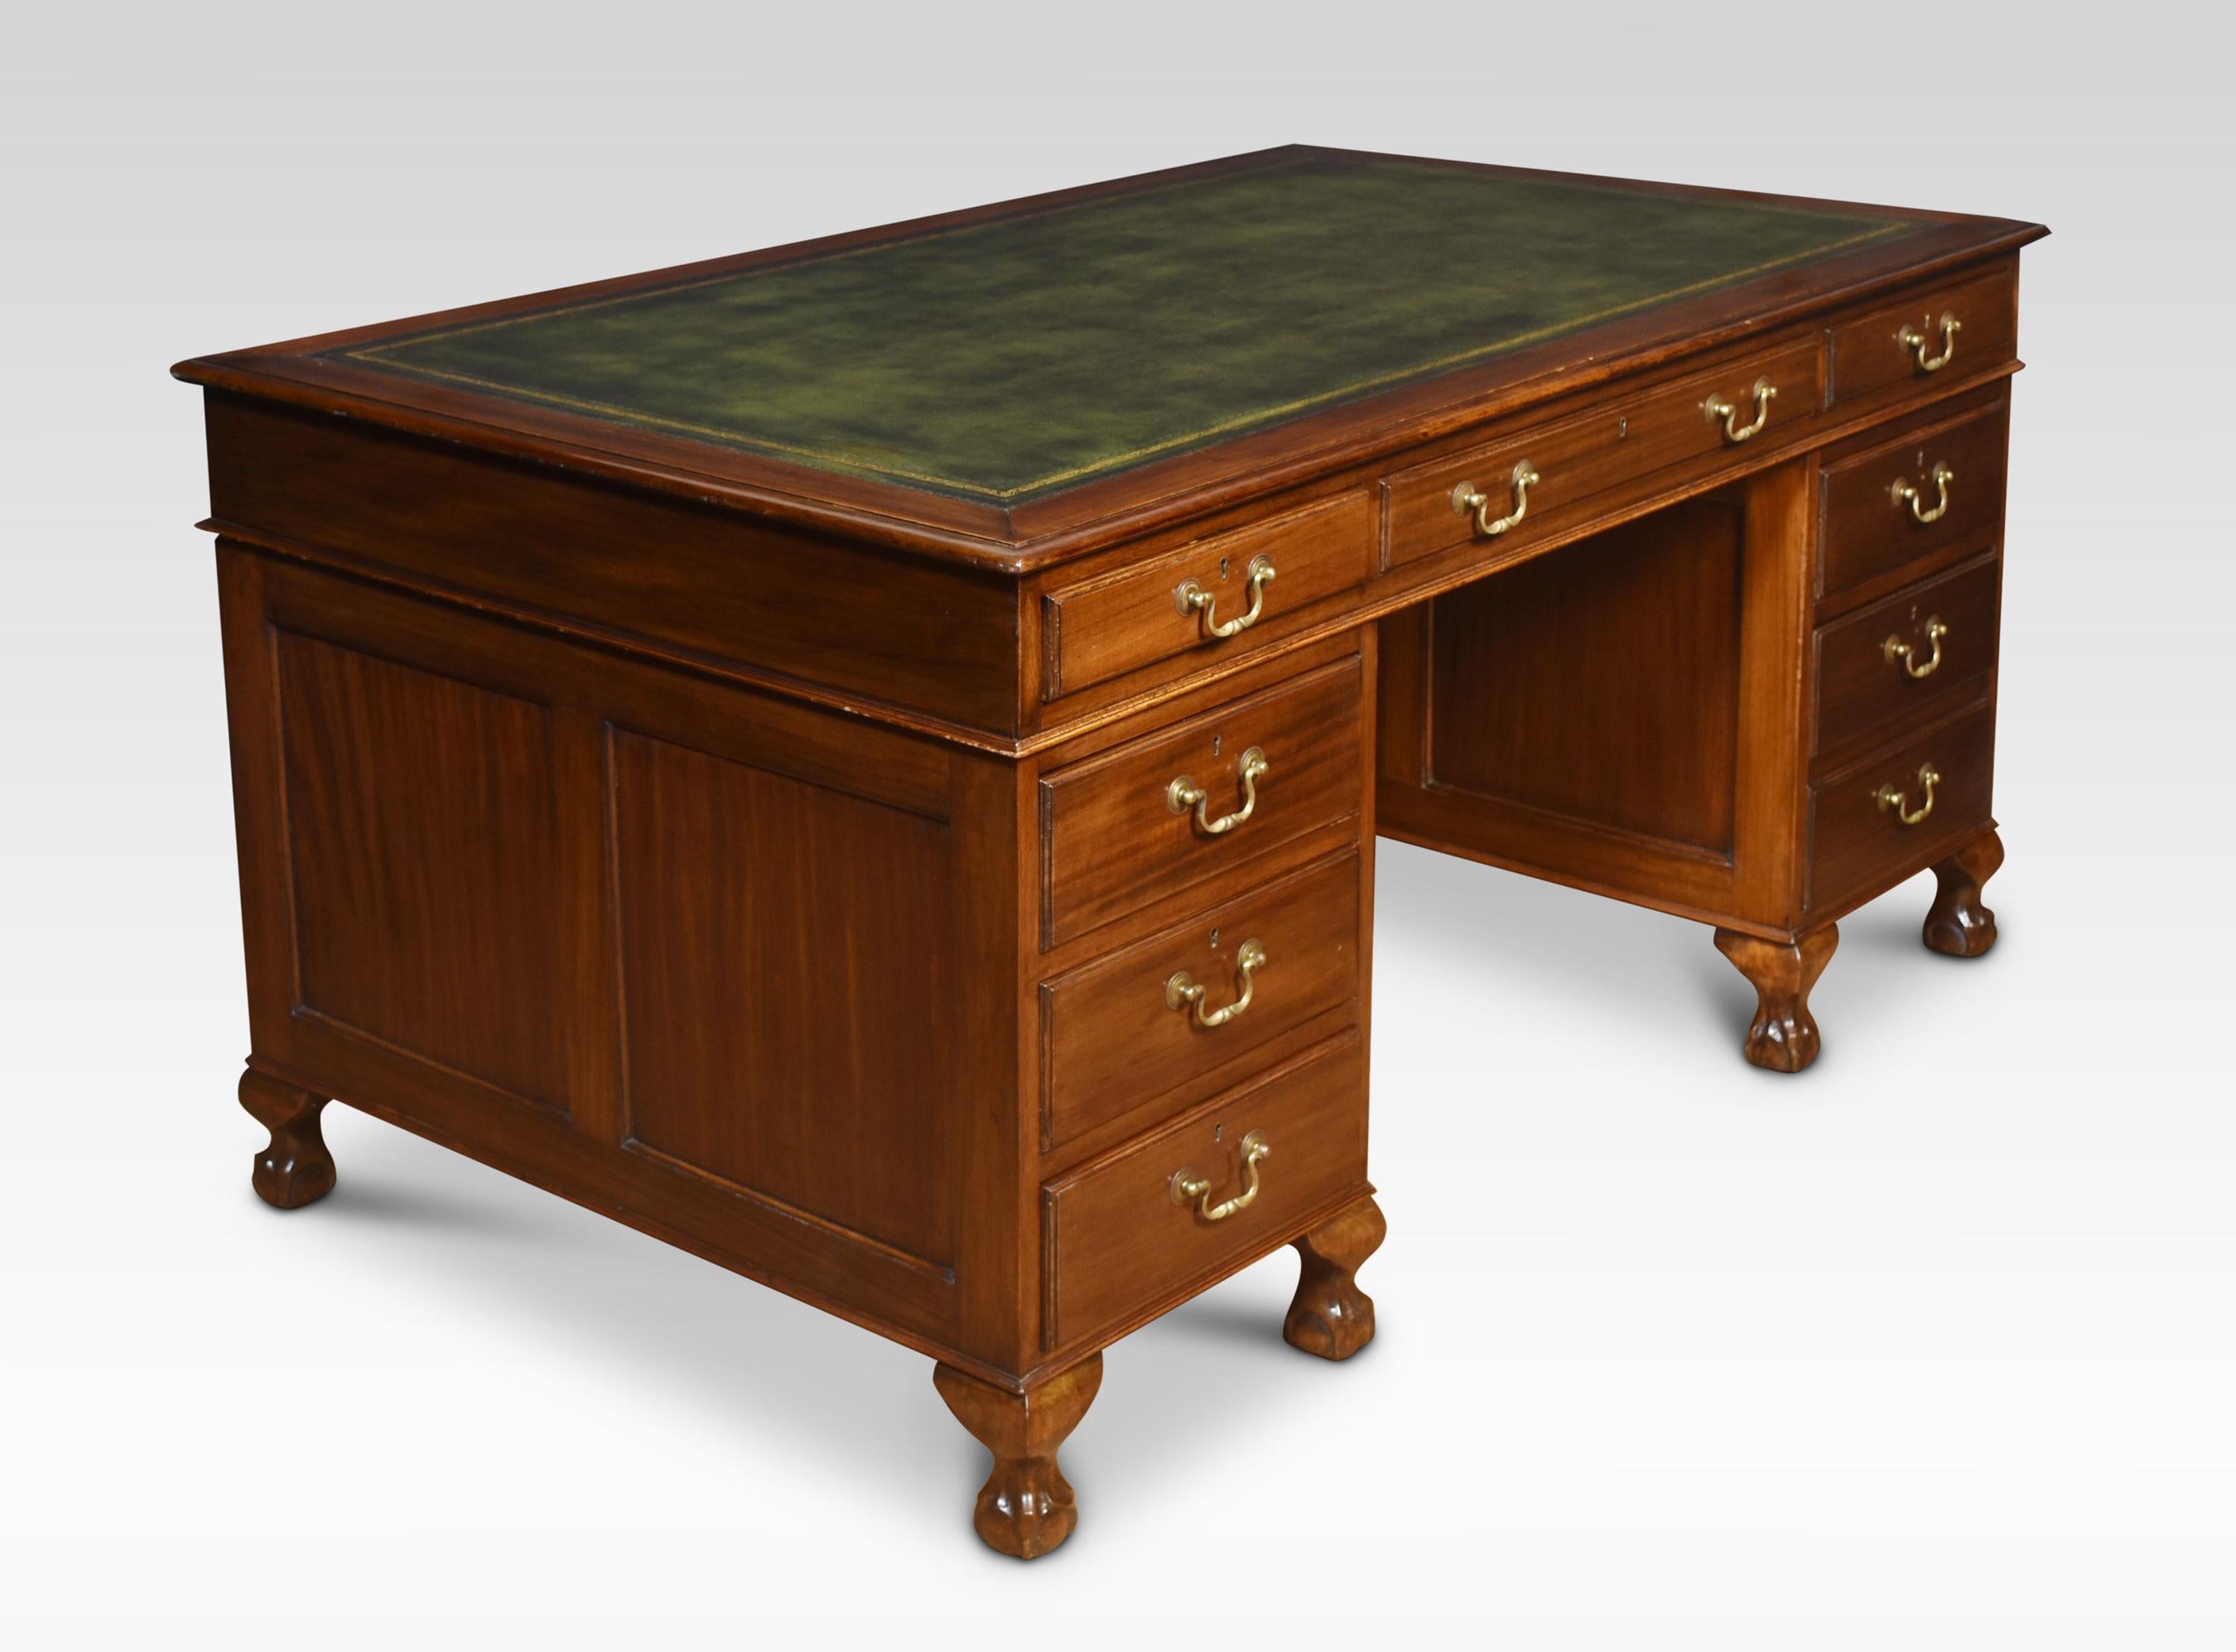 Large mahogany pedestal desk the rectangular top with inset leather having tooled border enclosed by a moulded edge over an arrangement of three freeze drawers. Above two large pedestals one fitted with three graduated drawers, the other having a